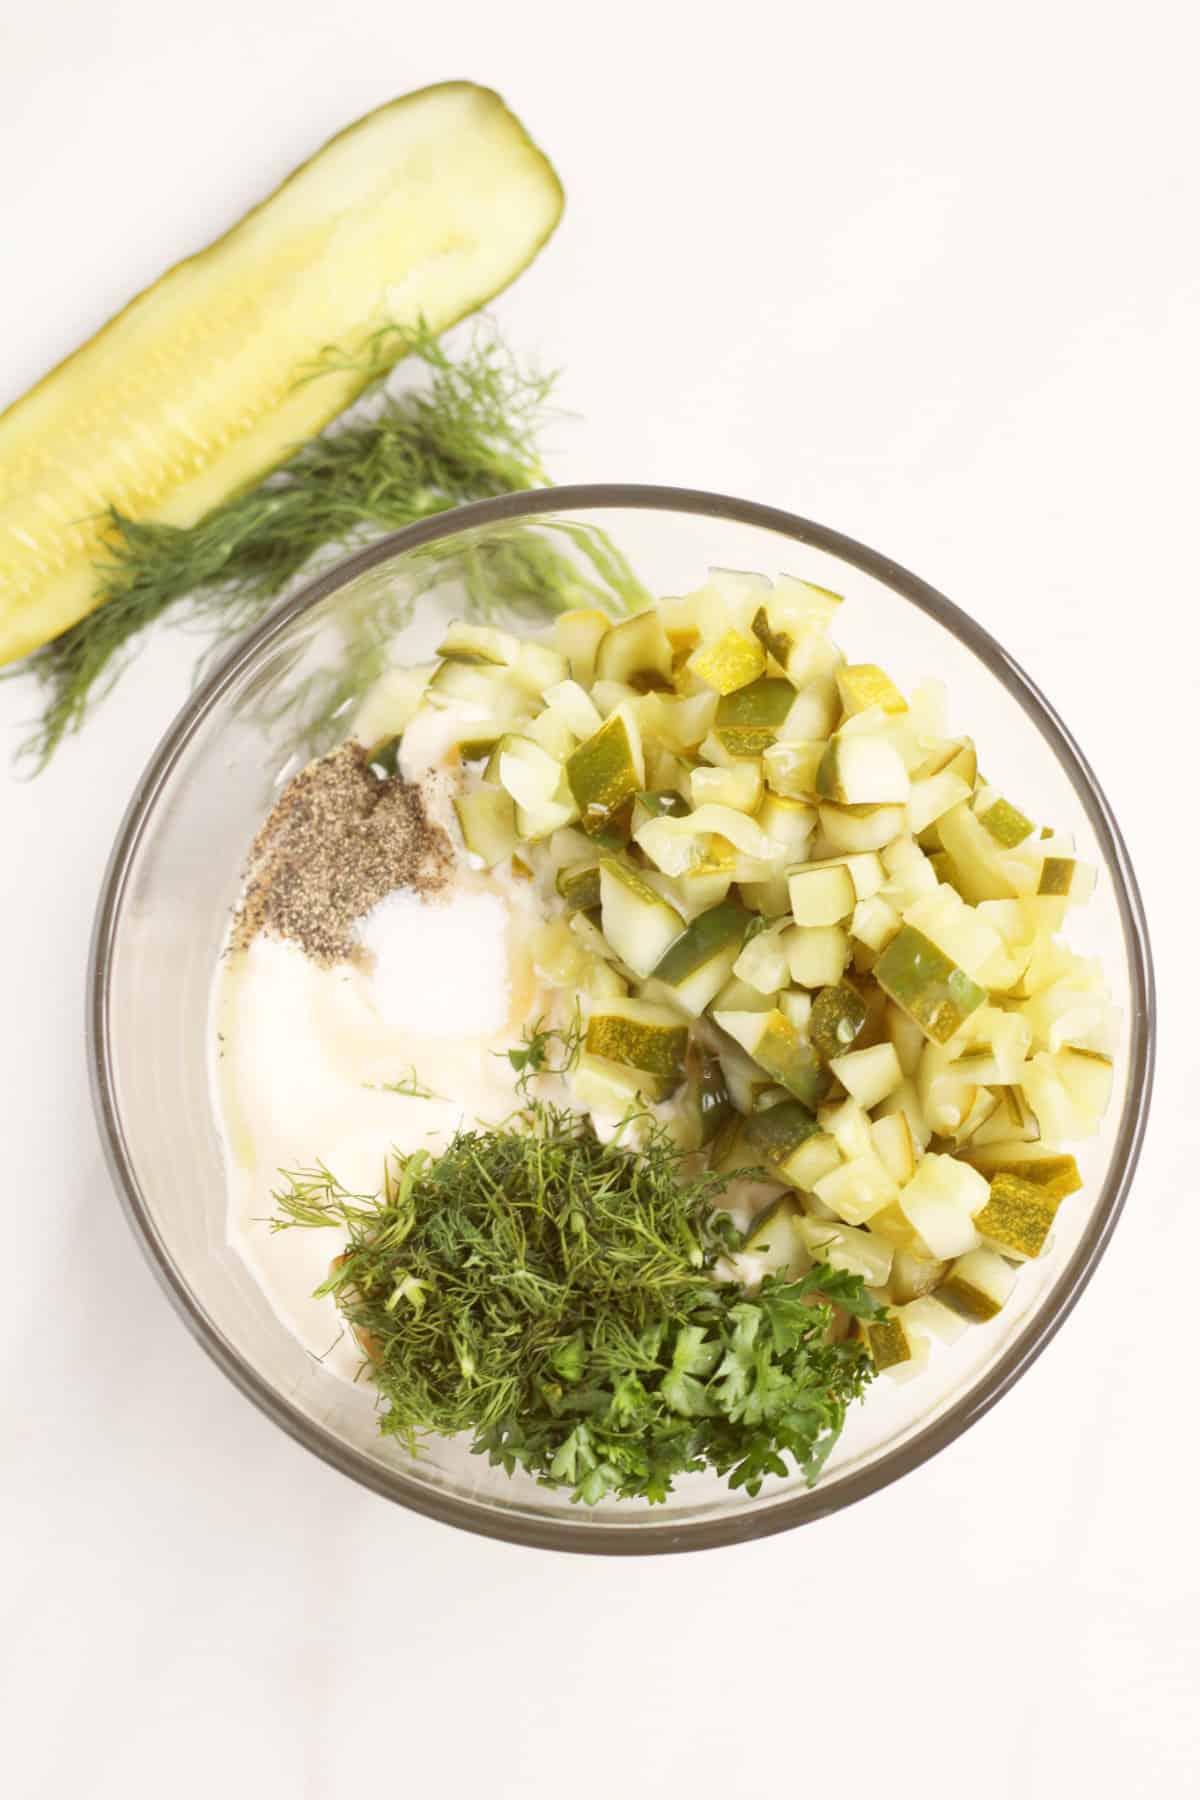 clear glass bowl with dill pickle, chopped dill, mayonnaise, and seasonings to mix together.